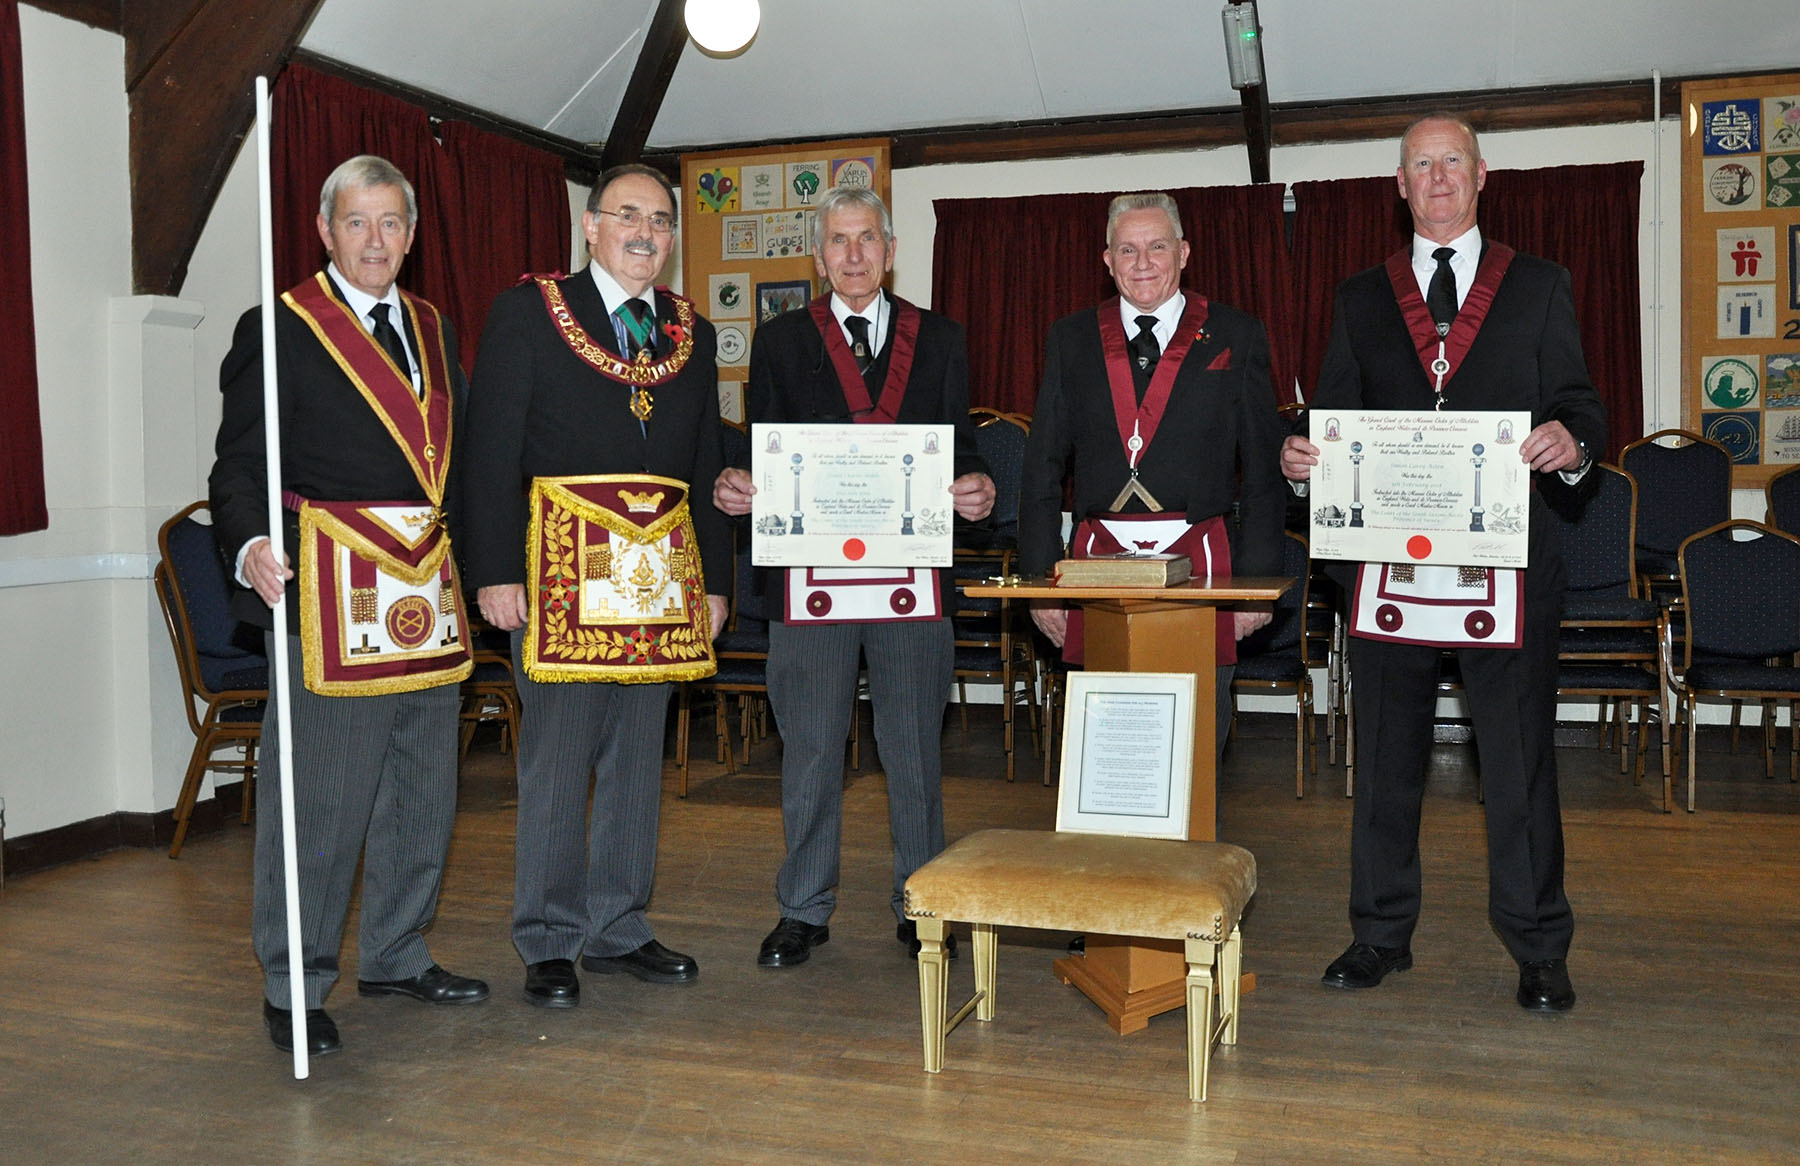 Executive Visit by the Provincial Grand Master to the Court of the South Saxons